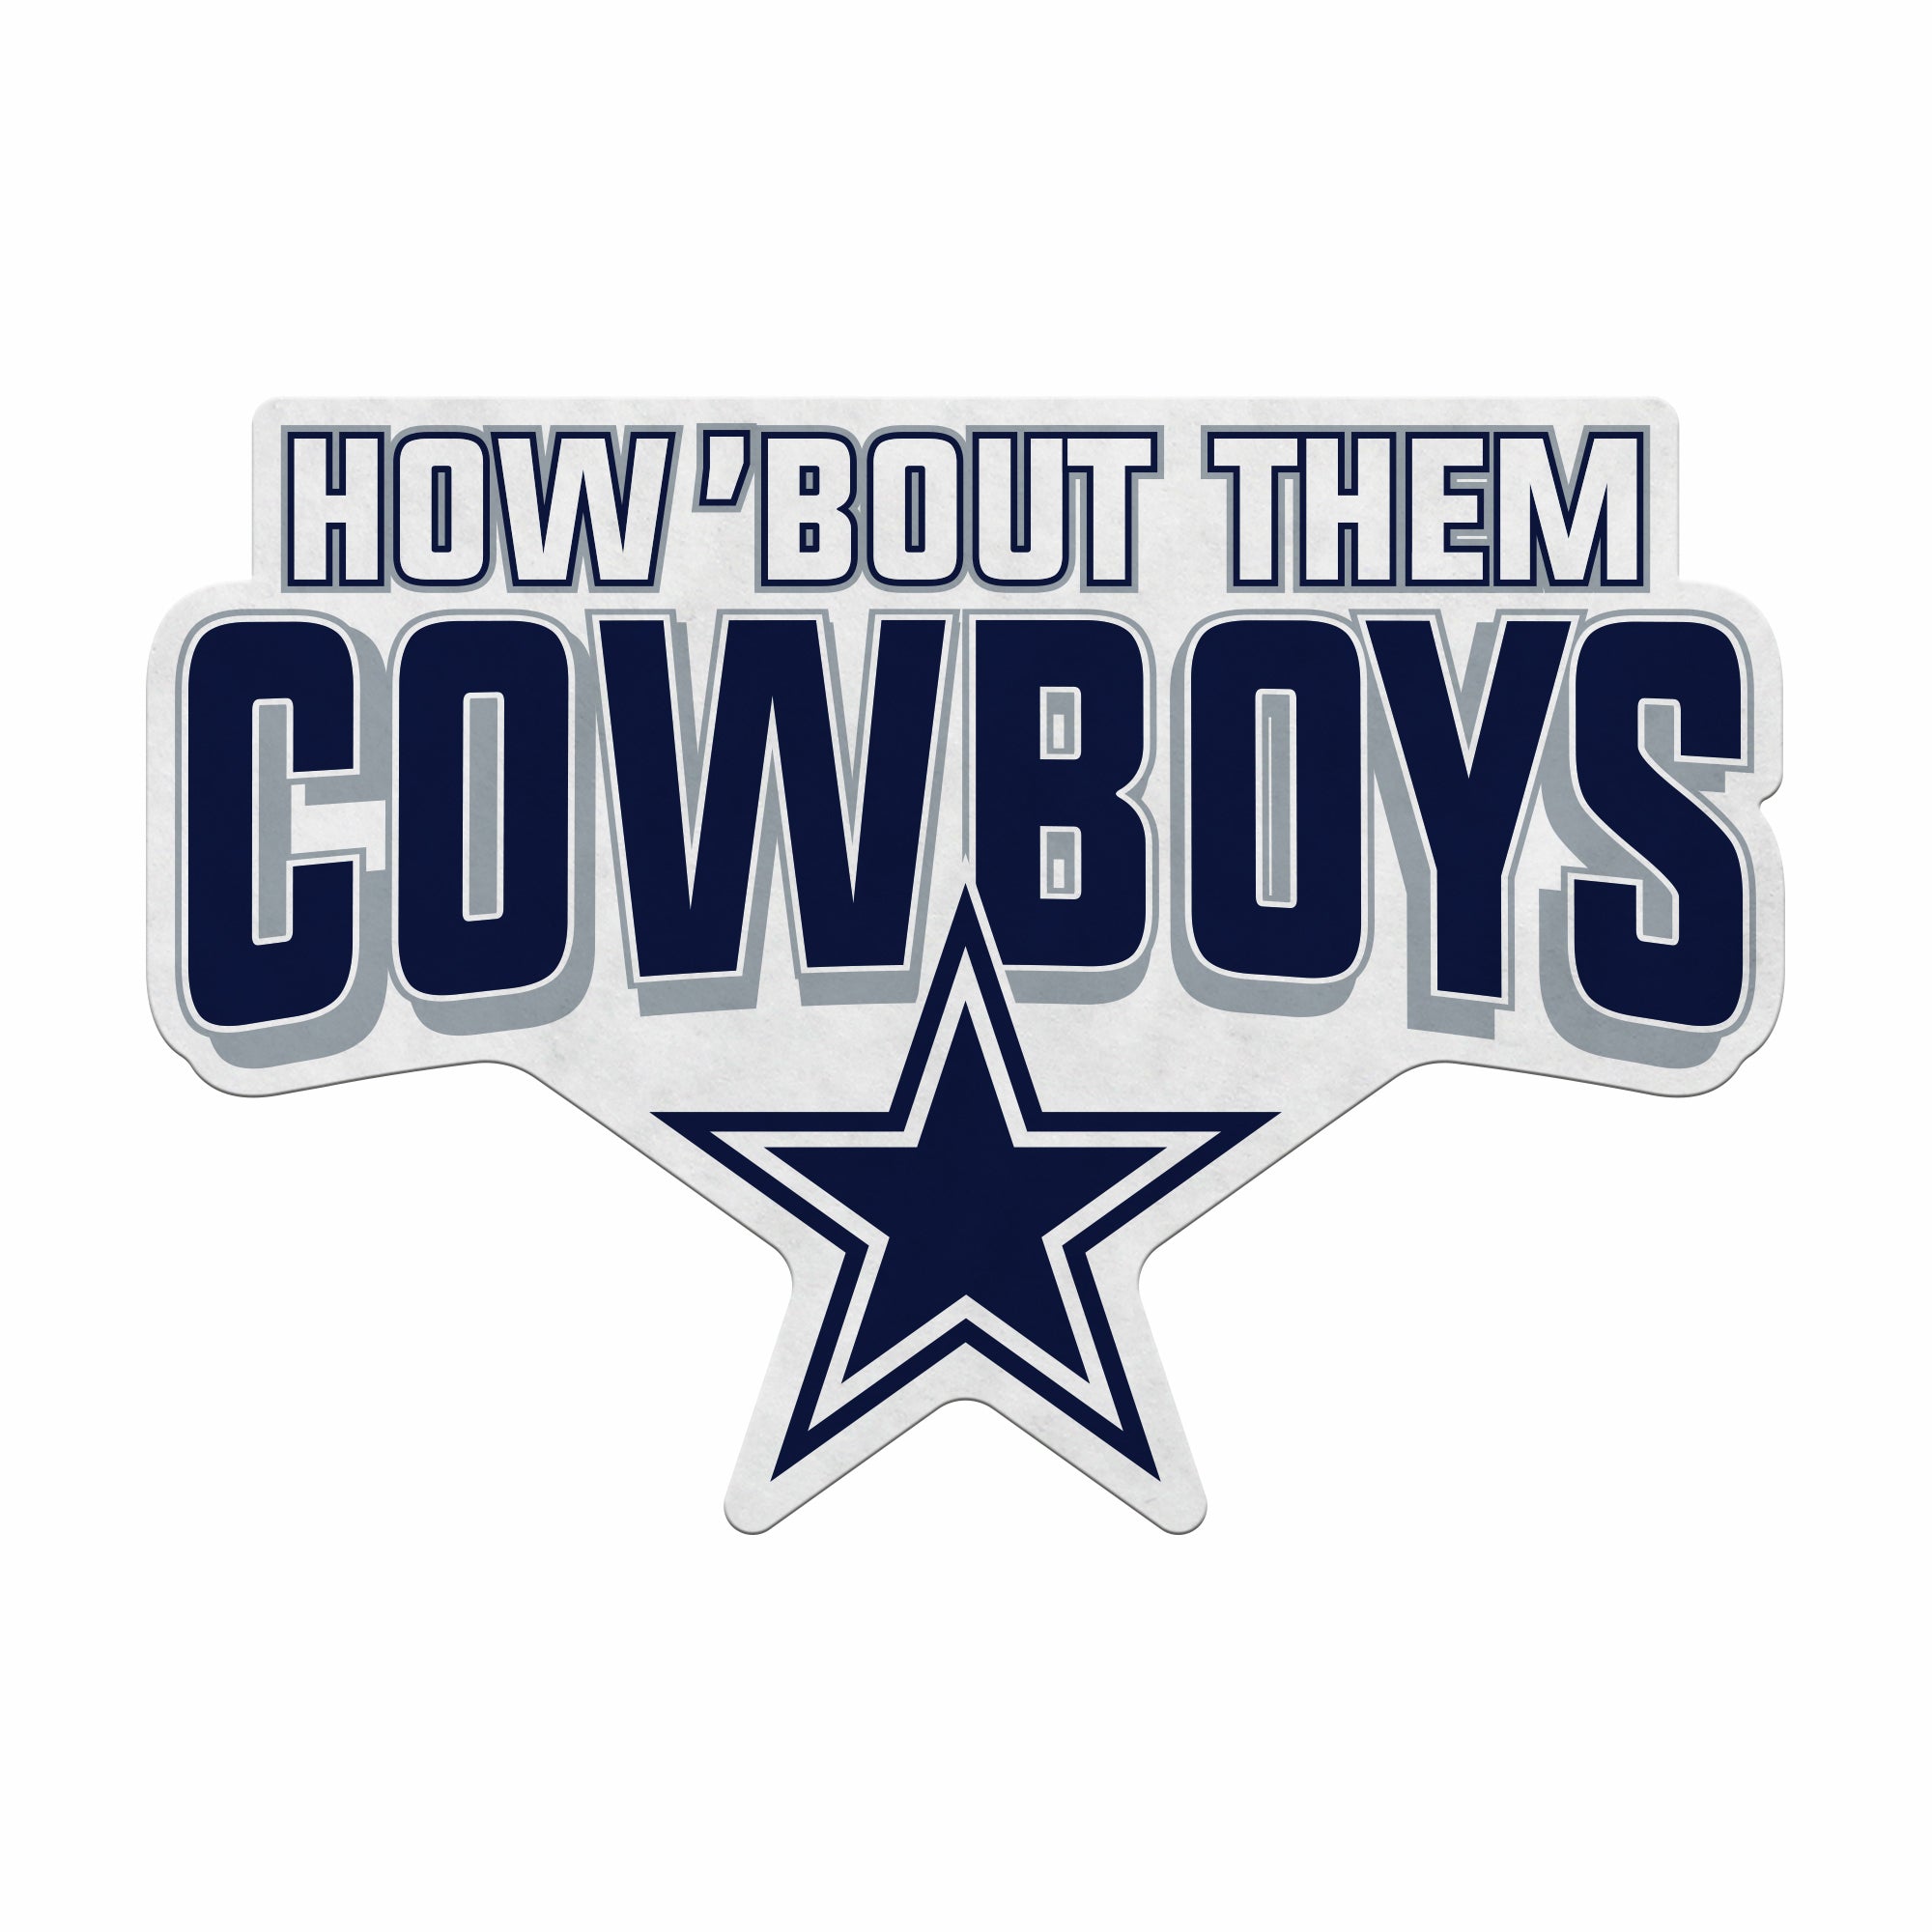 how bout them cowboys images